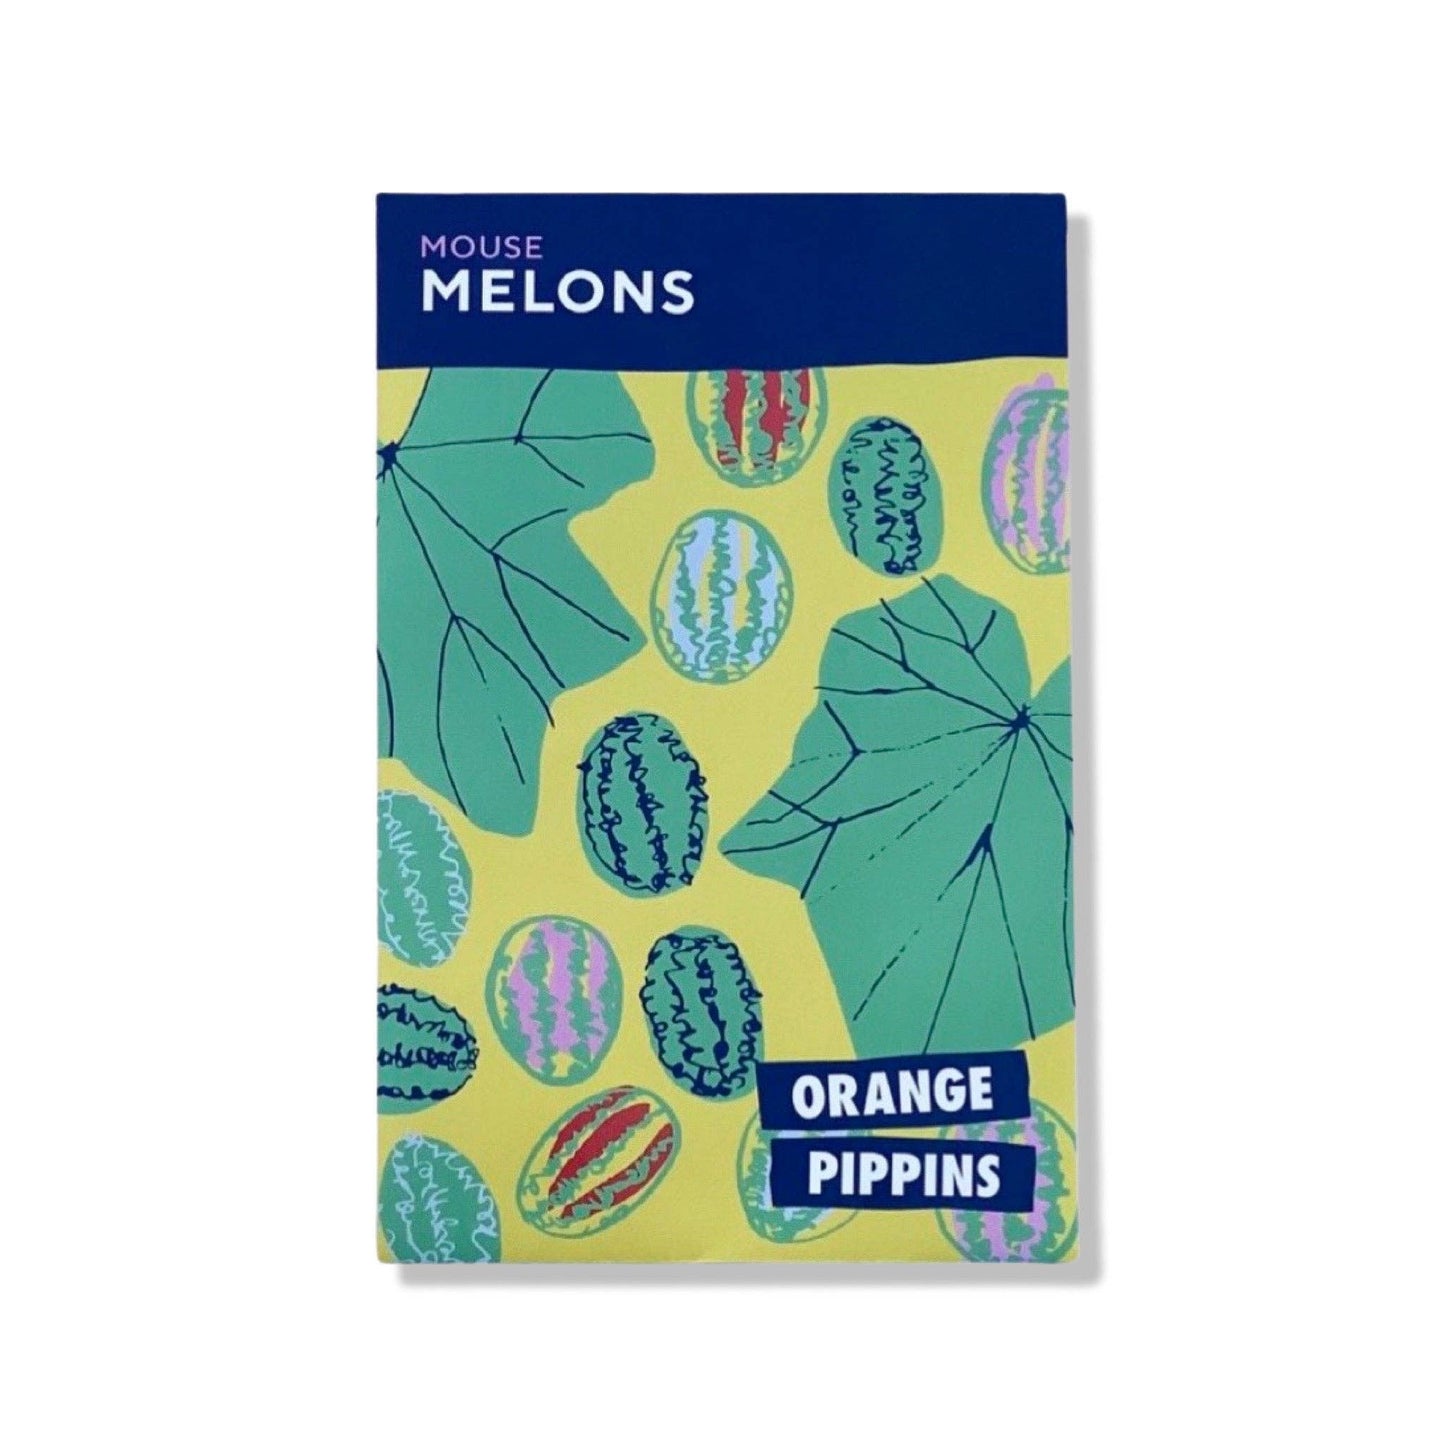 Orange Pippins - Mouse Melons